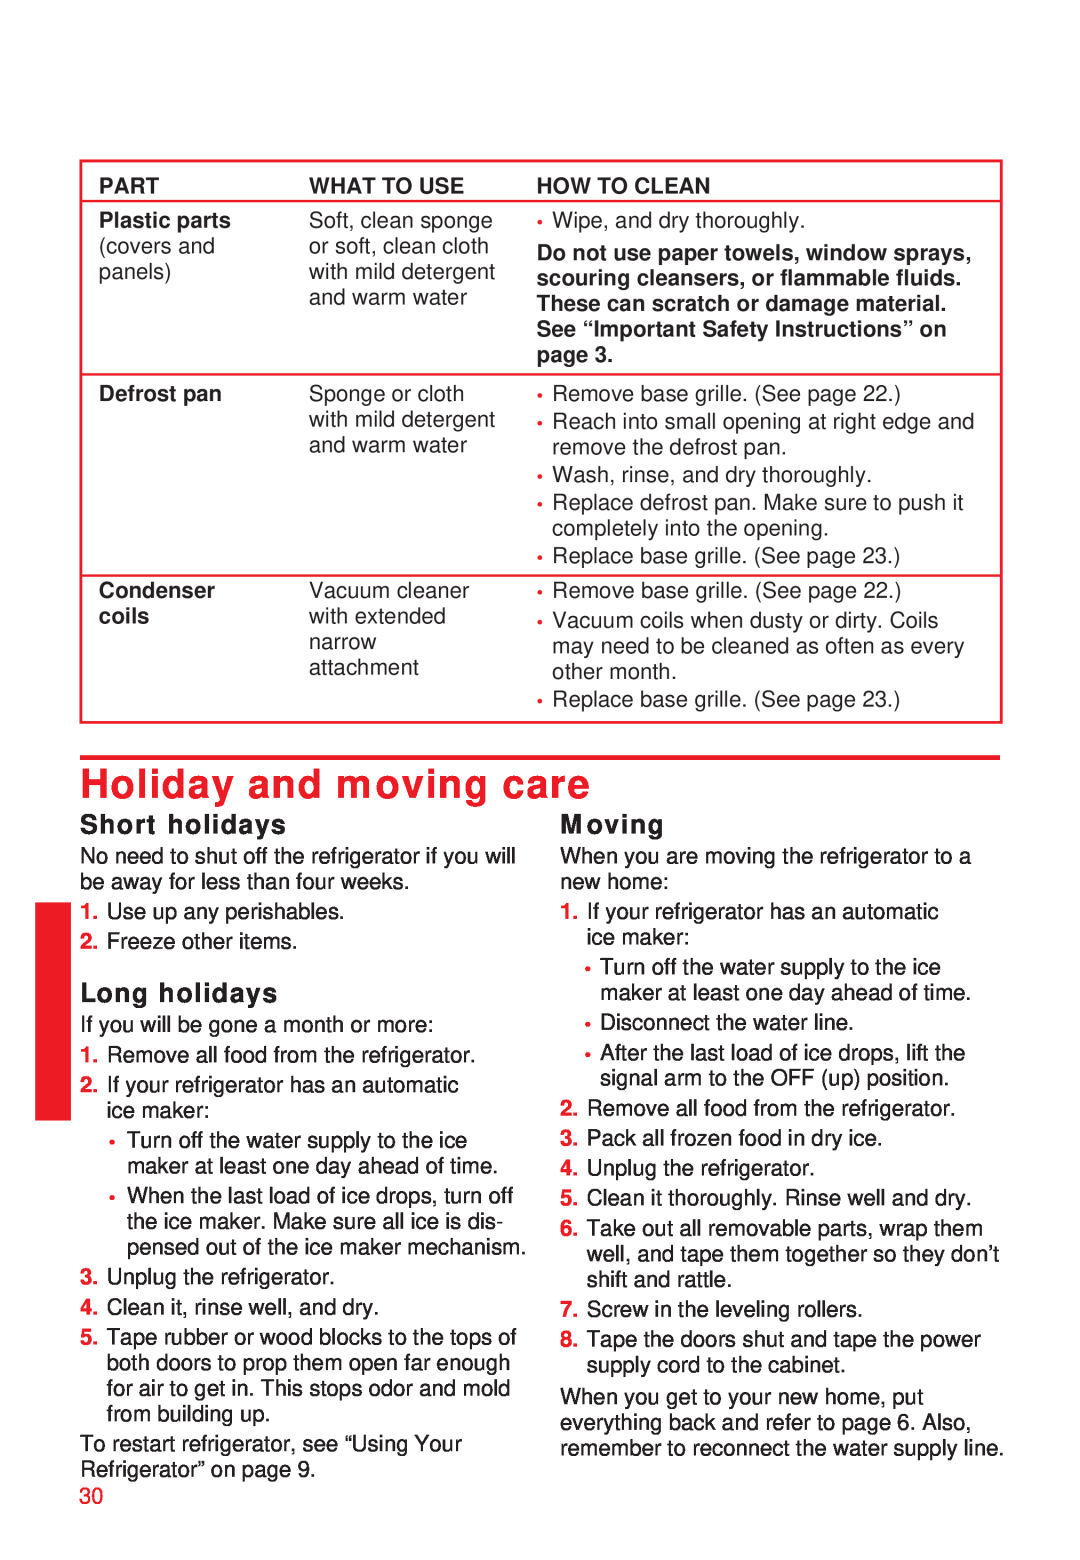 Whirlpool 2195258 Holiday and moving care, Short holidays, Long holidays, Moving, Plastic parts, page, Defrost pan, coils 